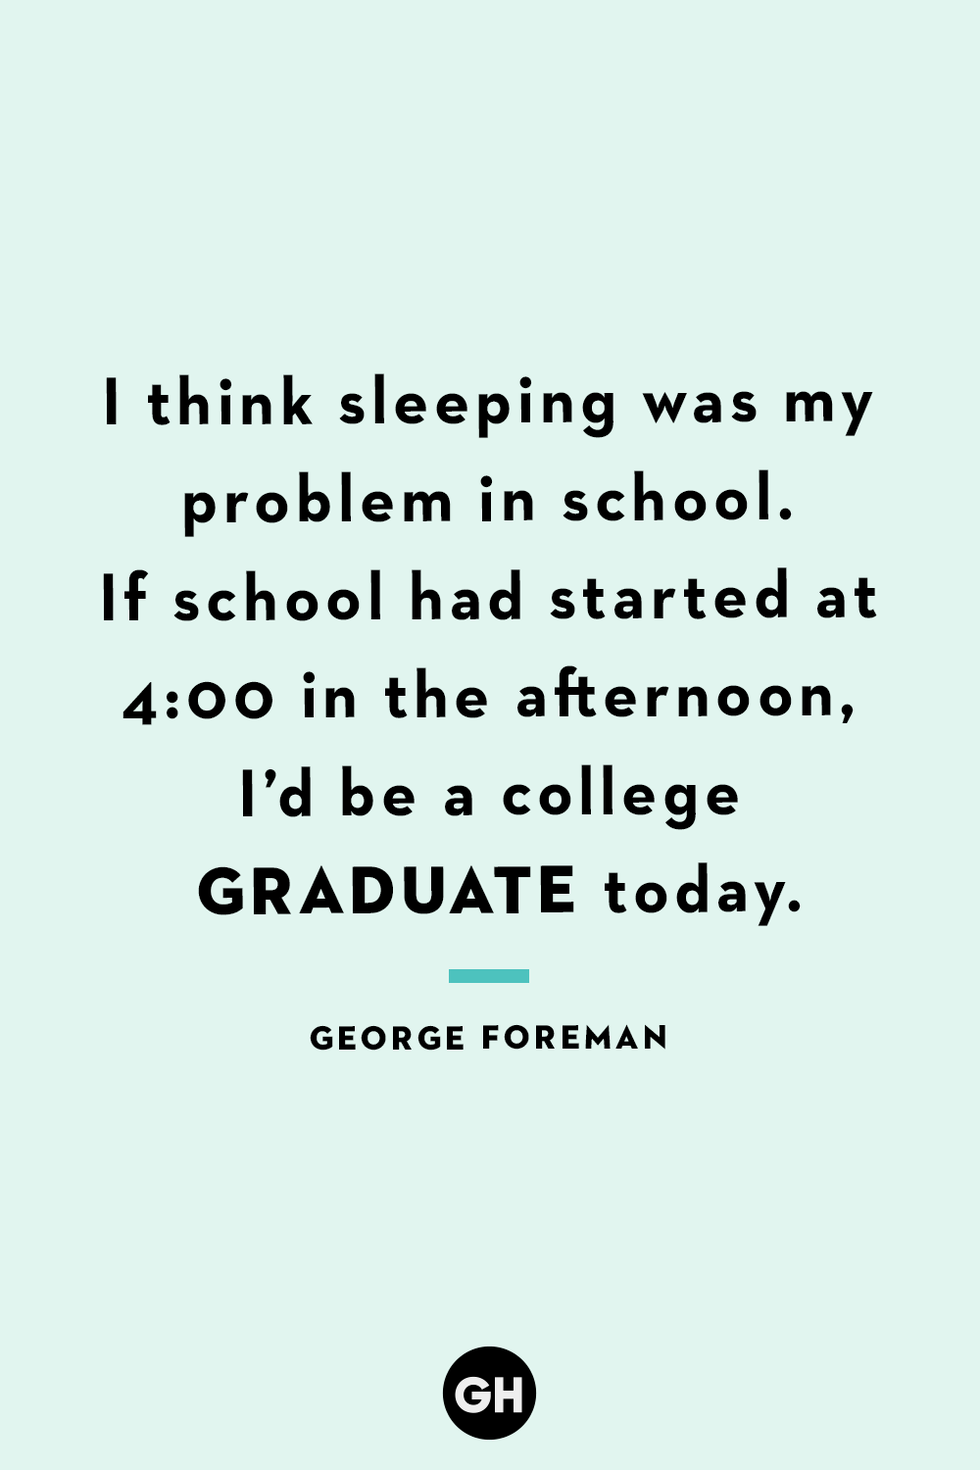 funny graduation quotes — george foreman